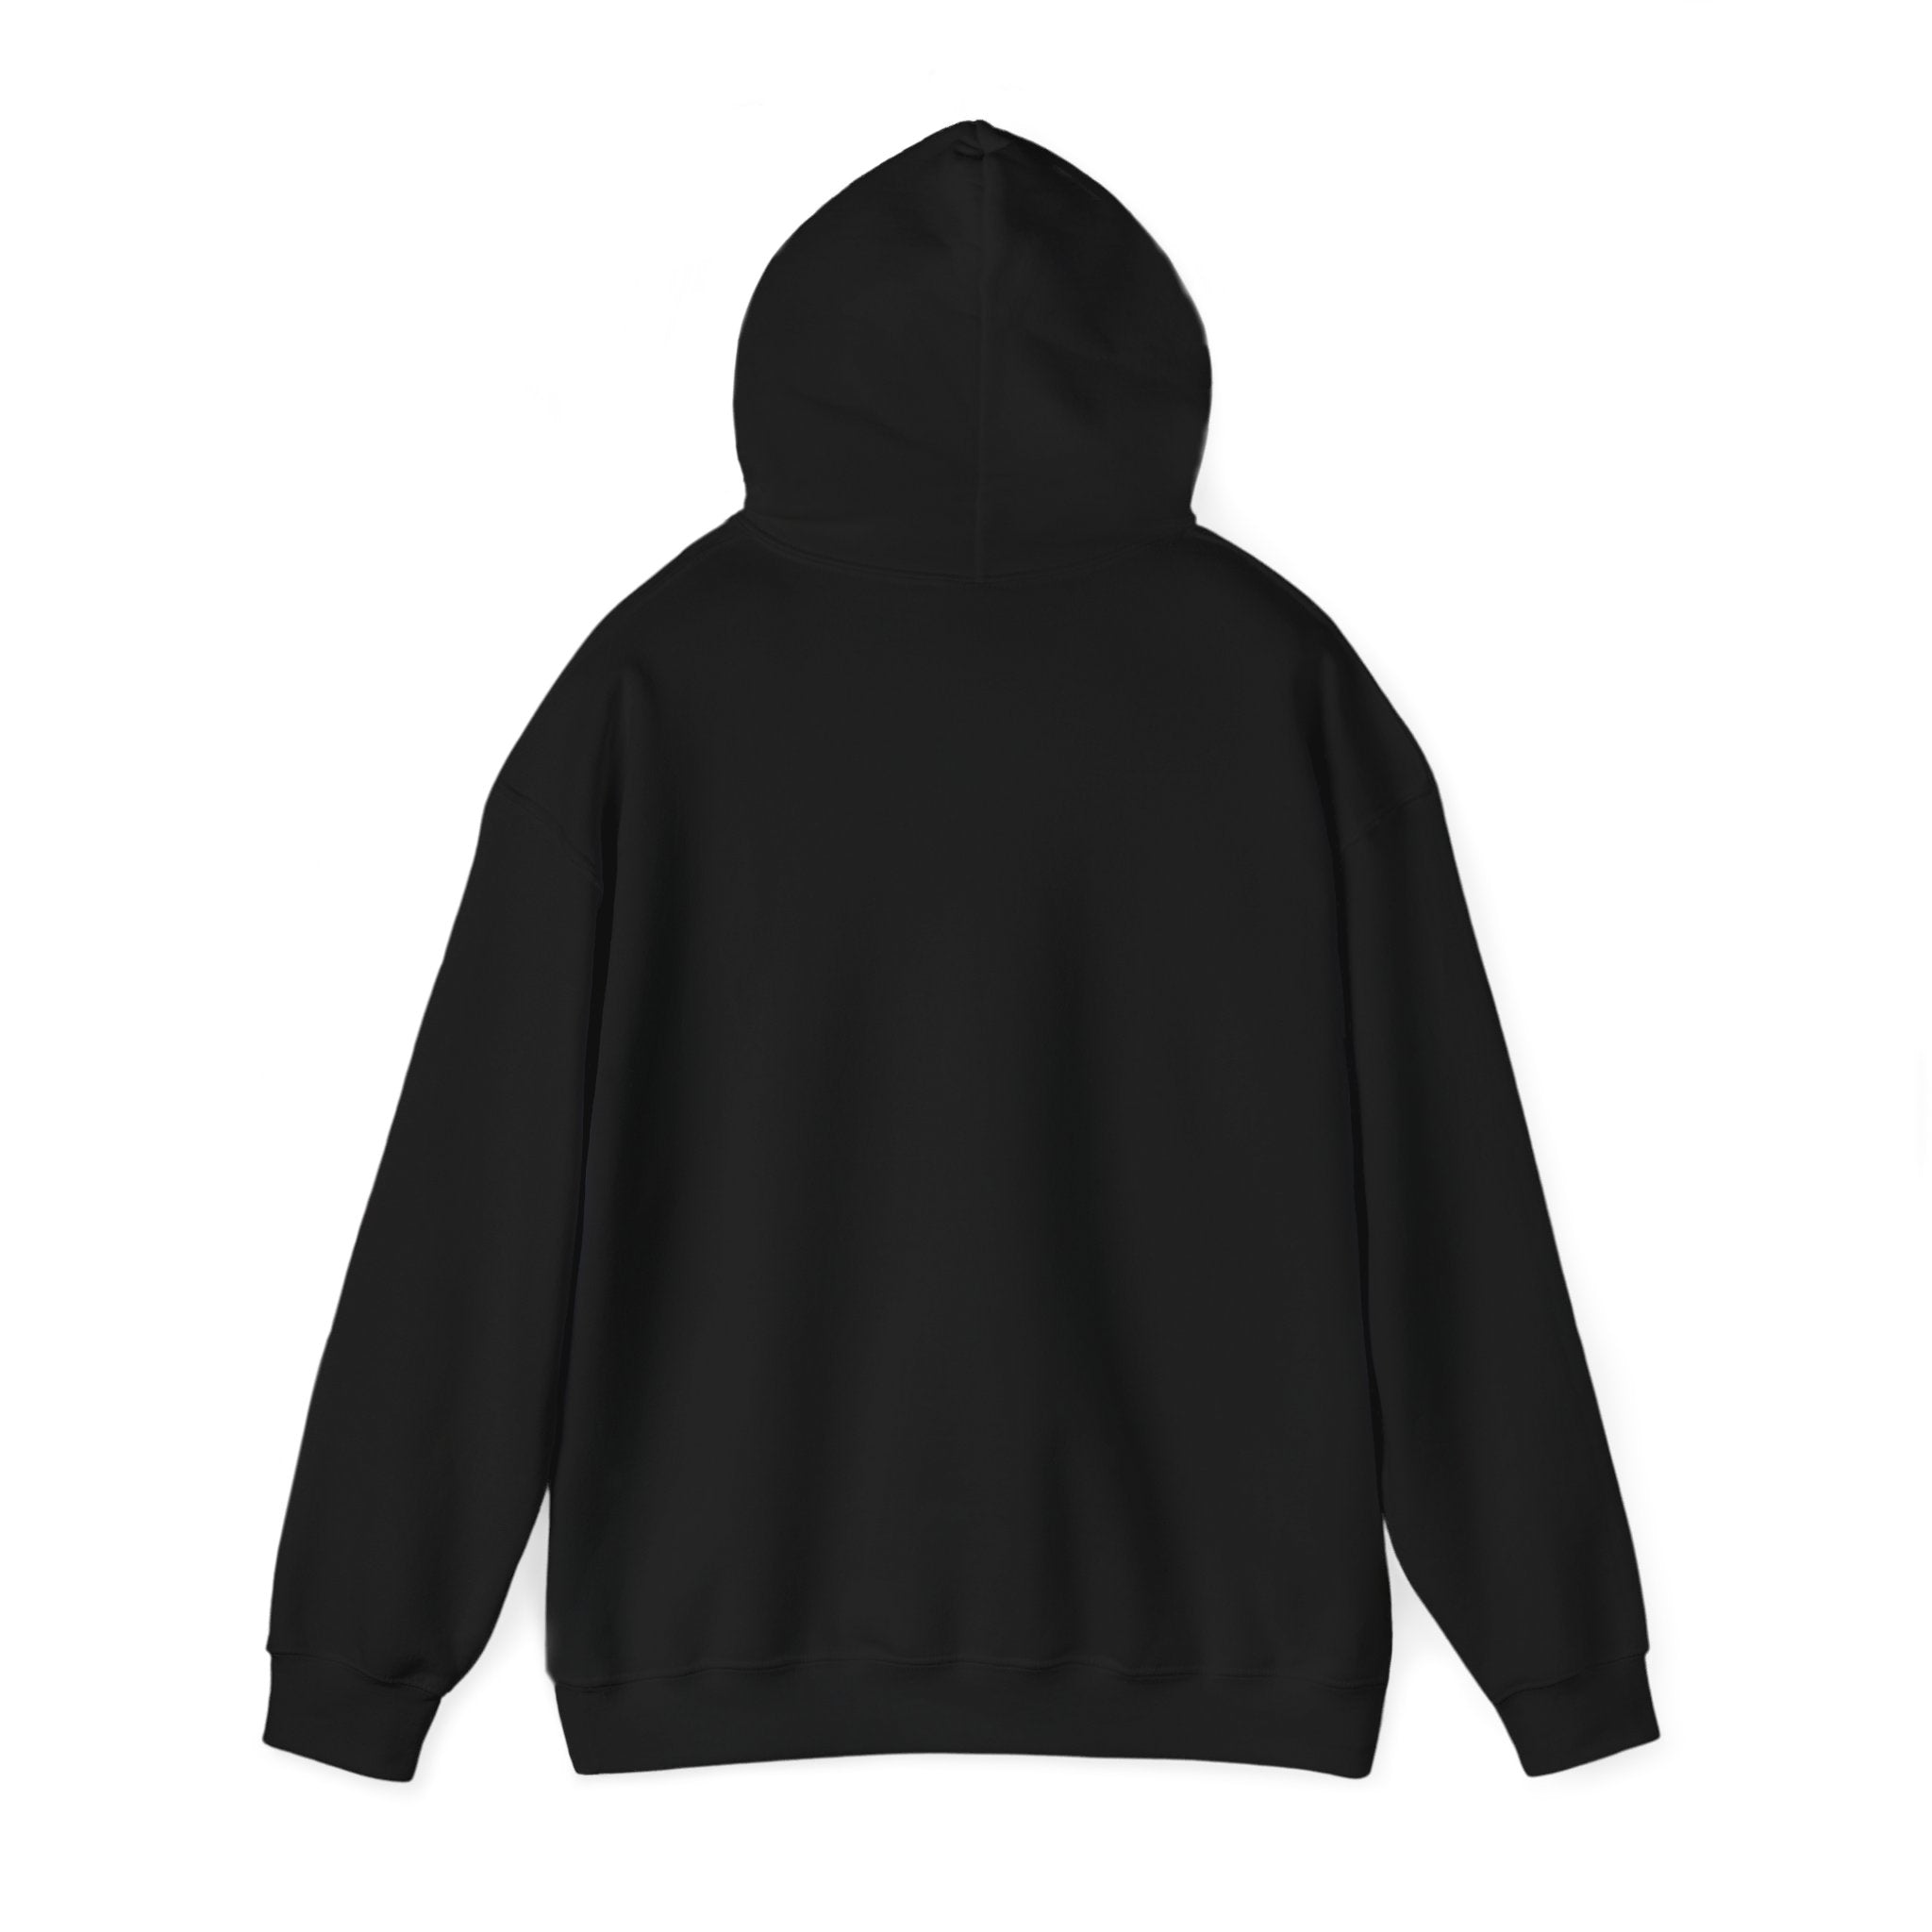 A plain black Semaphore - Hooded Sweatshirt displayed from the back, showcasing its long sleeves and cozy fit. The design is simple with no visible logos or patterns, emphasizing its seamless design.